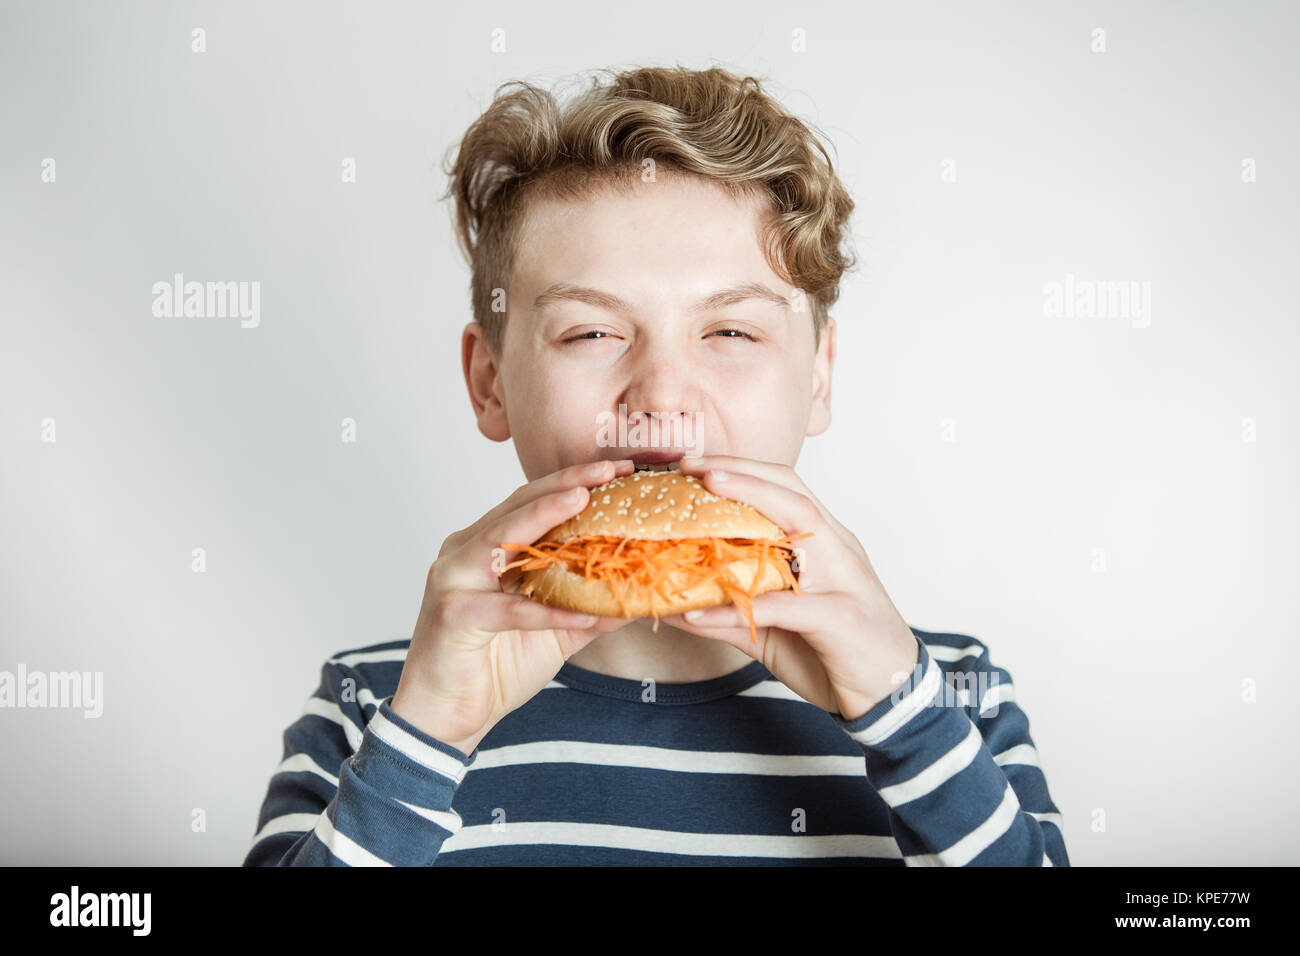 Boy Eating Burger Bun Topped with Shredded Carrots Stock Photo